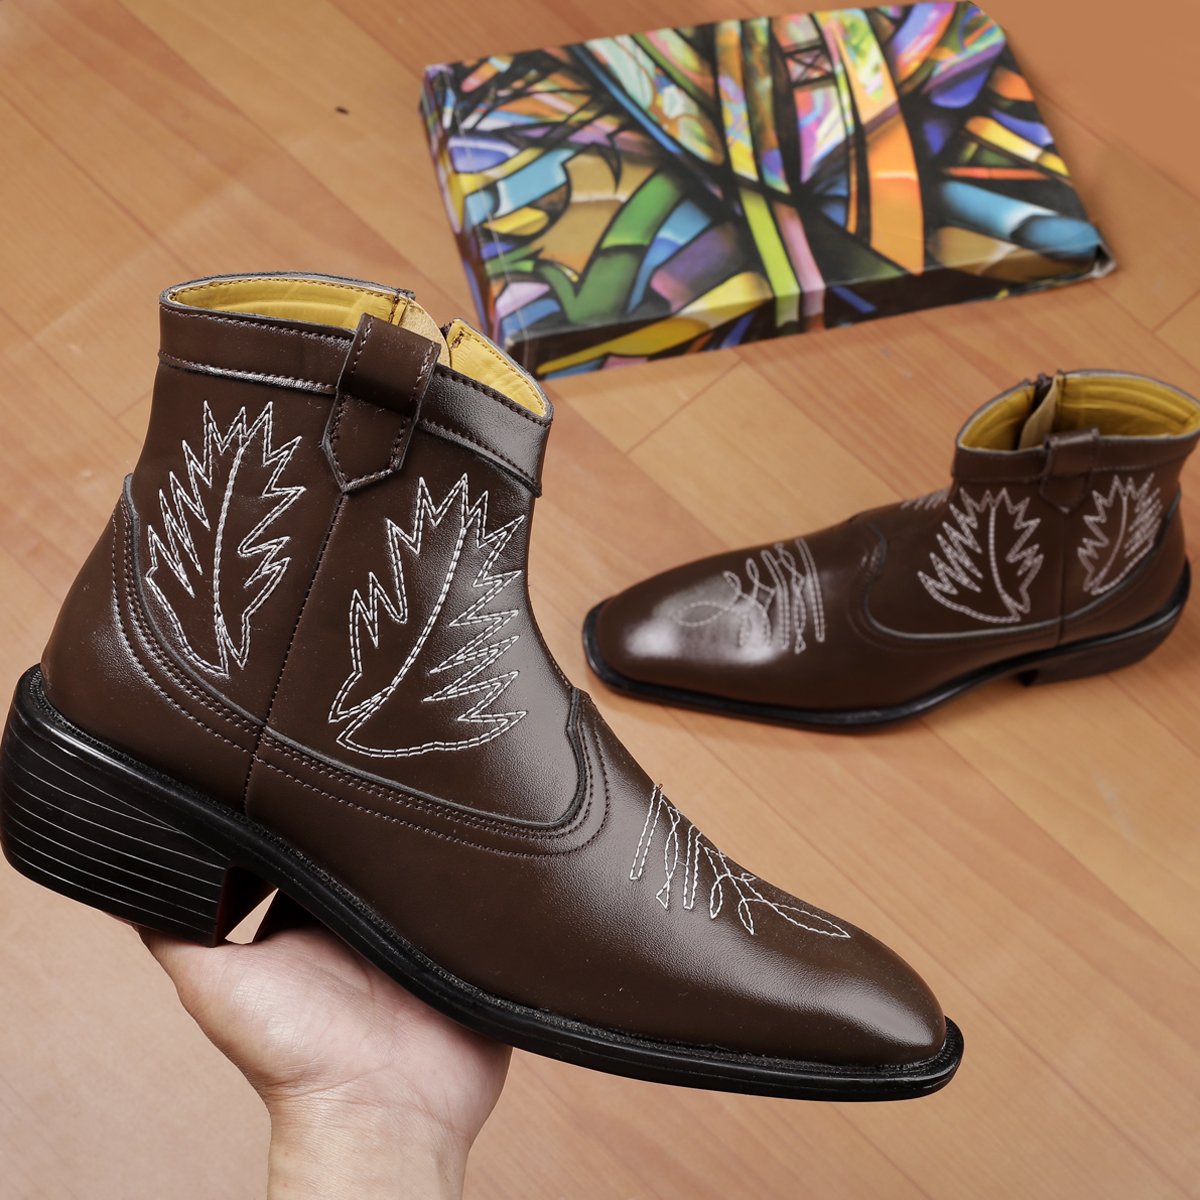 Buy New Men's Formal and Casual Retro Brown Boots for all seasons